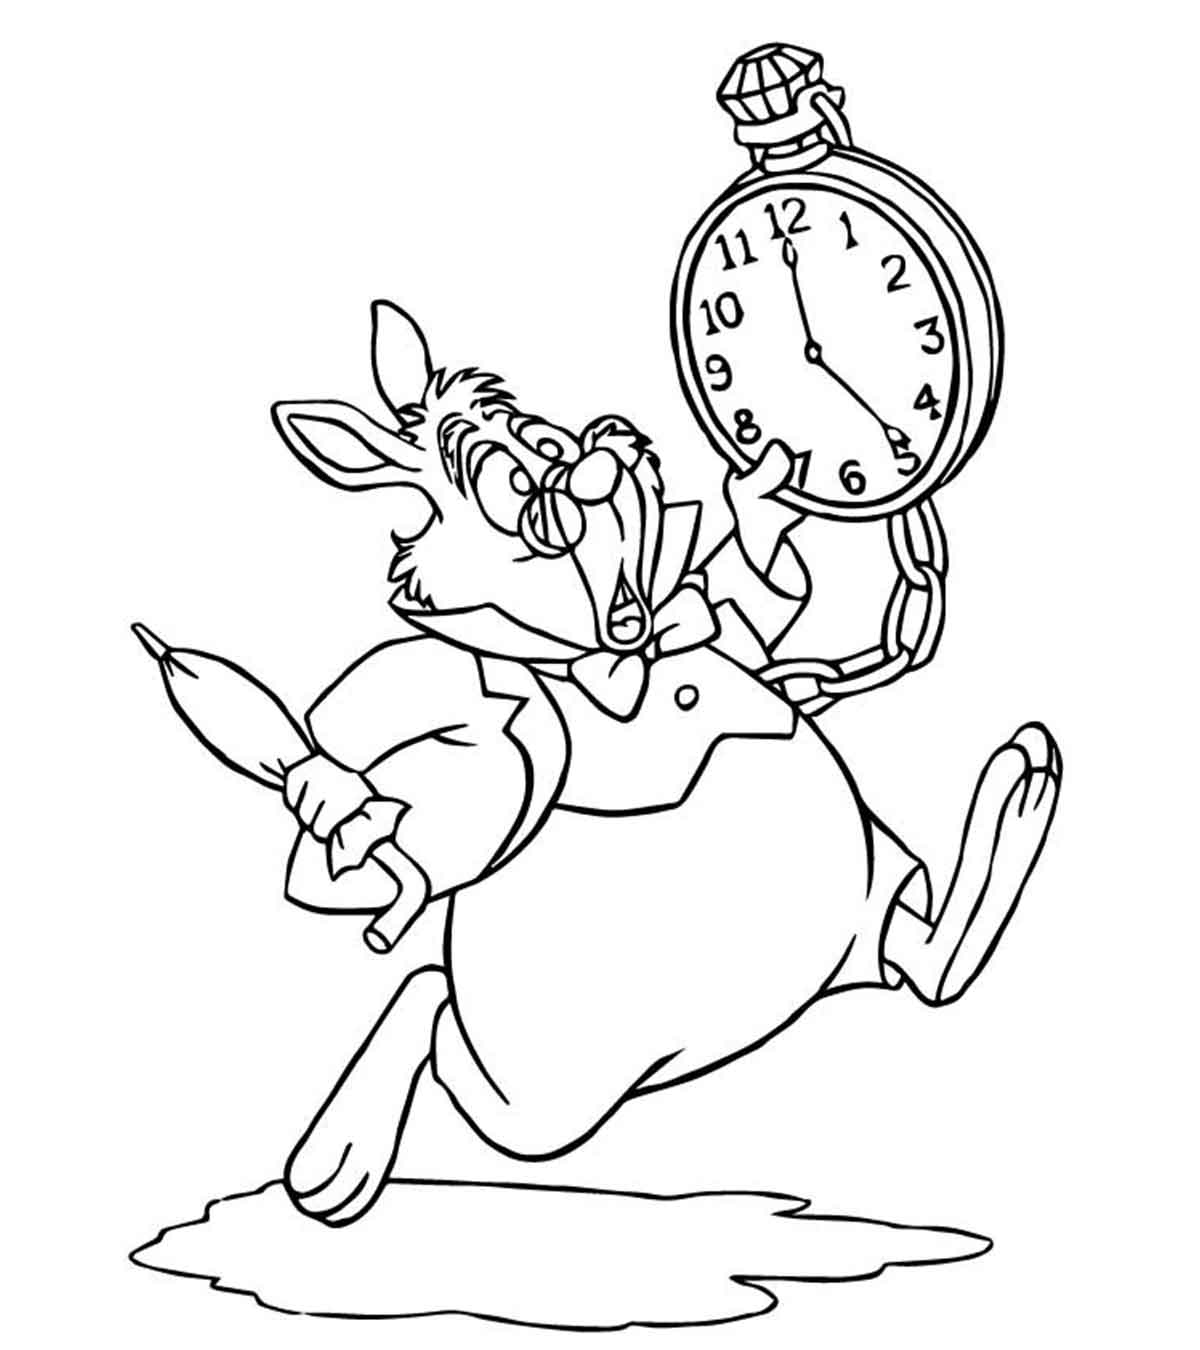 Peter Pan Color Sheets coloring page